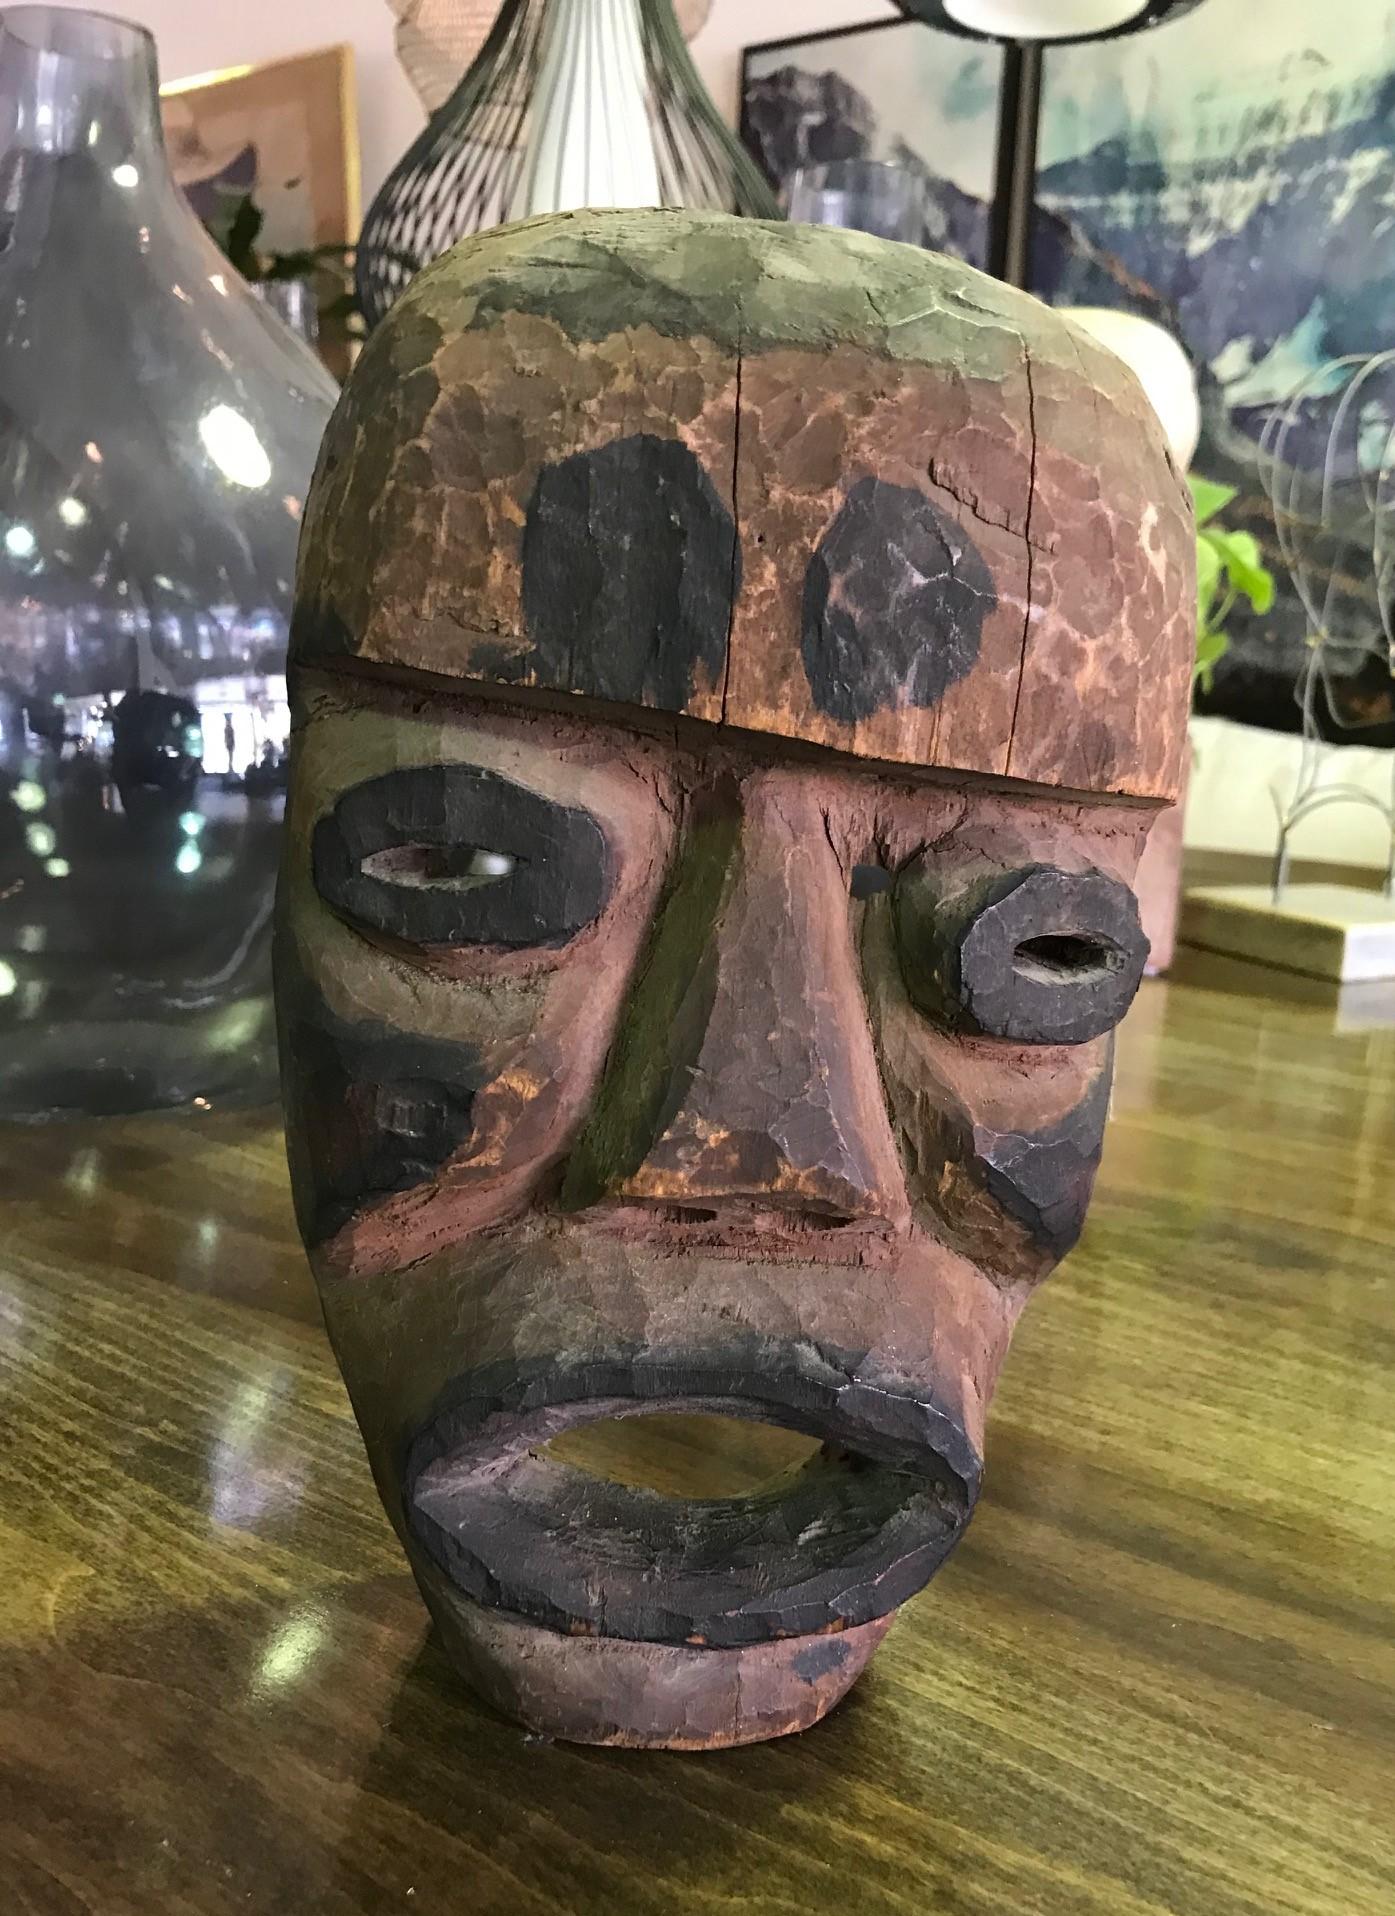 An interesting piece. Quite unique. We are at a loss to what region this might be from. The facial features are very pronounced and the mask has been nicely colored with various pigments. The mask has some age to it and a nice patina. 

We are